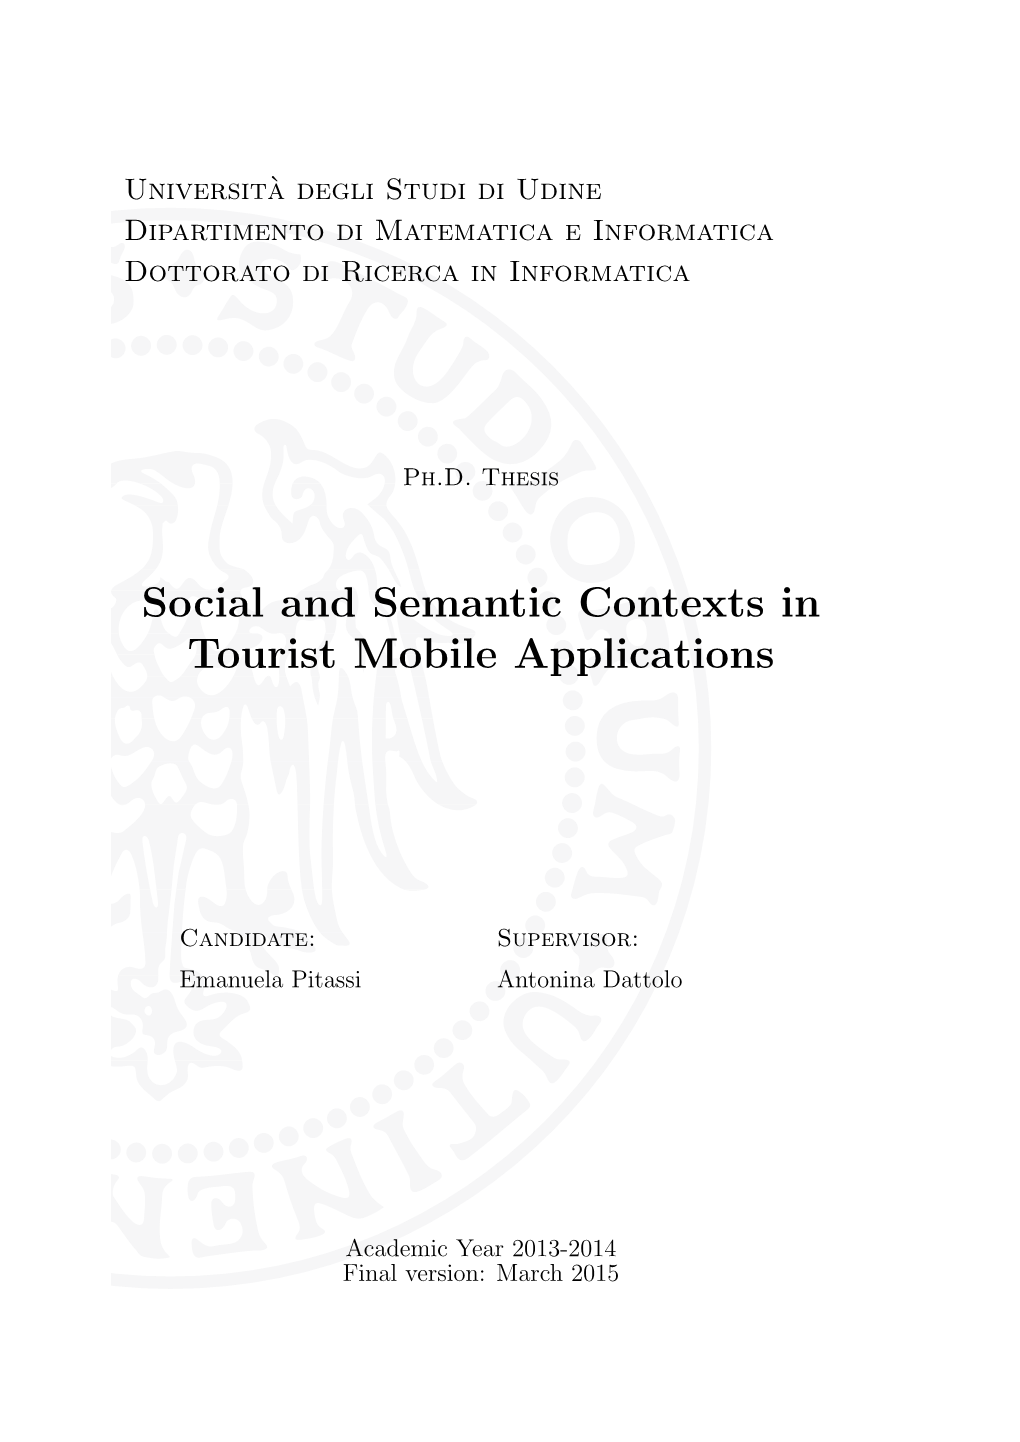 Social and Semantic Contexts in Tourist Mobile Applications